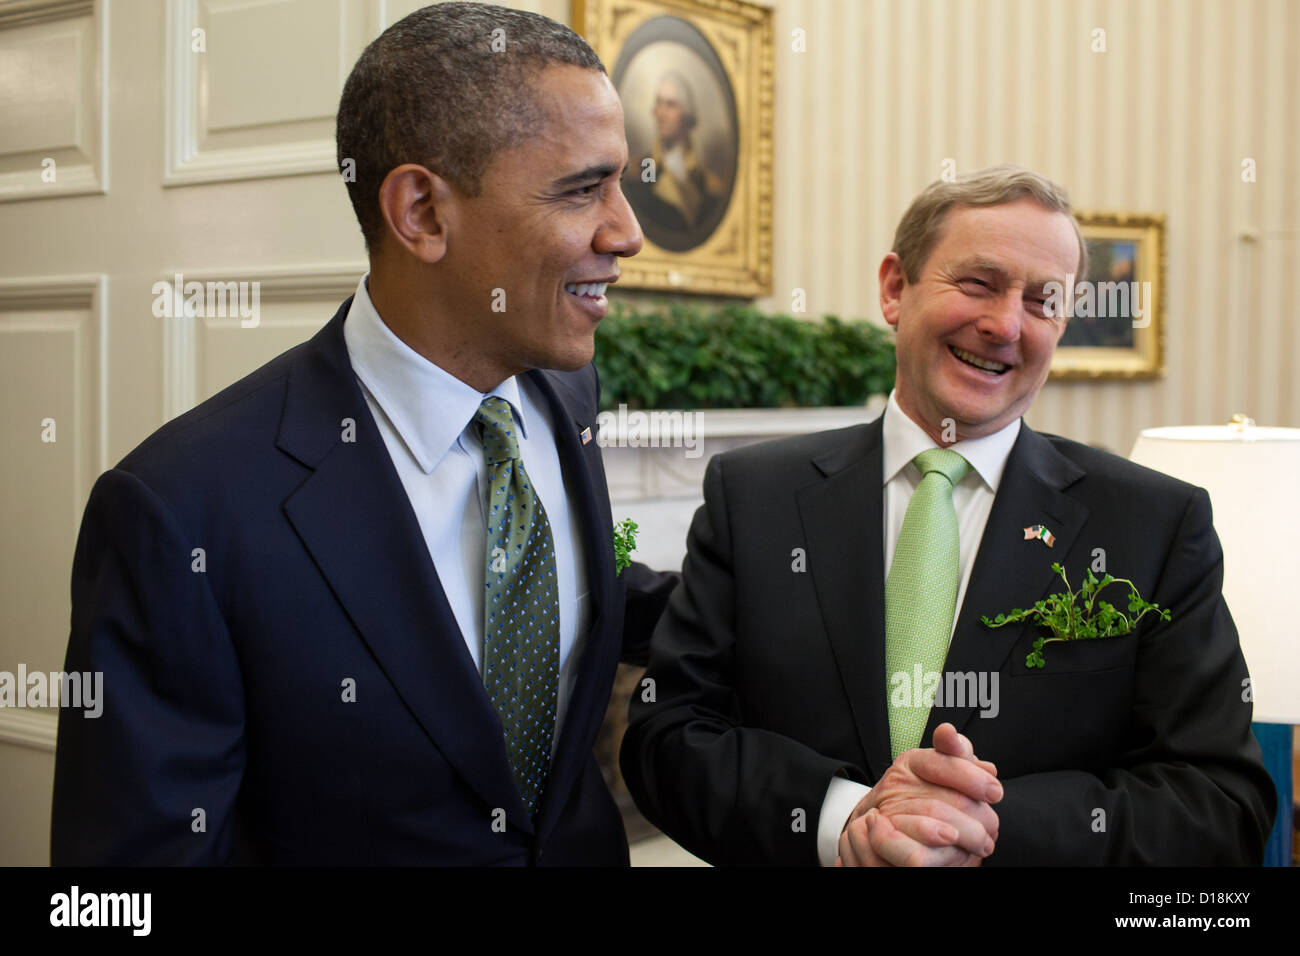 President Barack Obama meets with Taoiseach Enda Kenny of Ireland in the Oval Office, March 20, 2012. Stock Photo